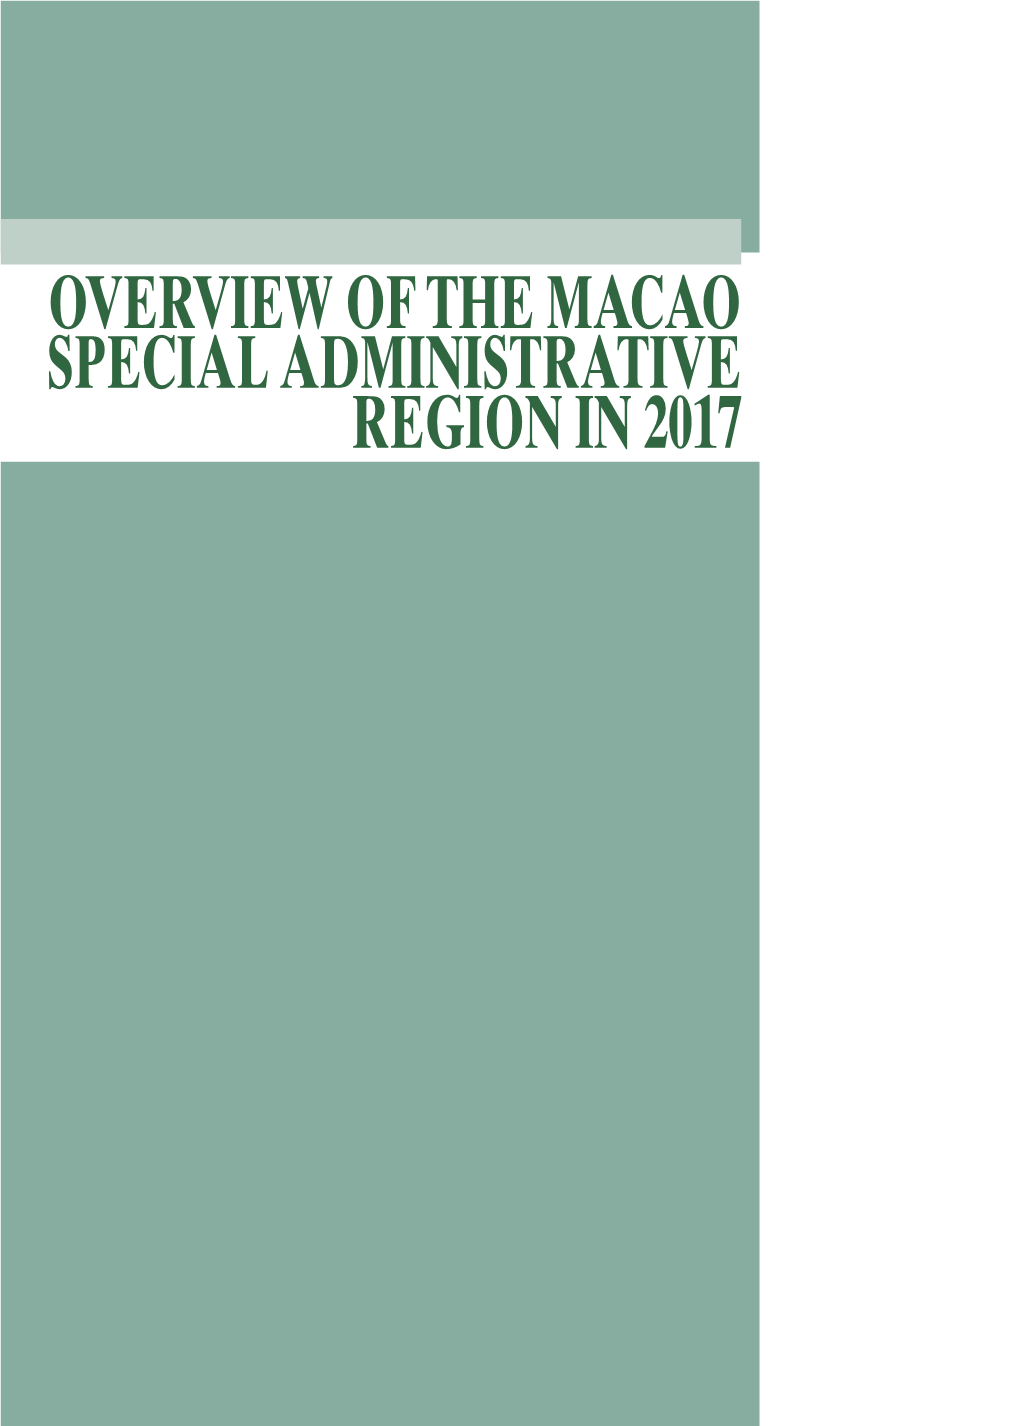 Overview of the Macao Special Administrative